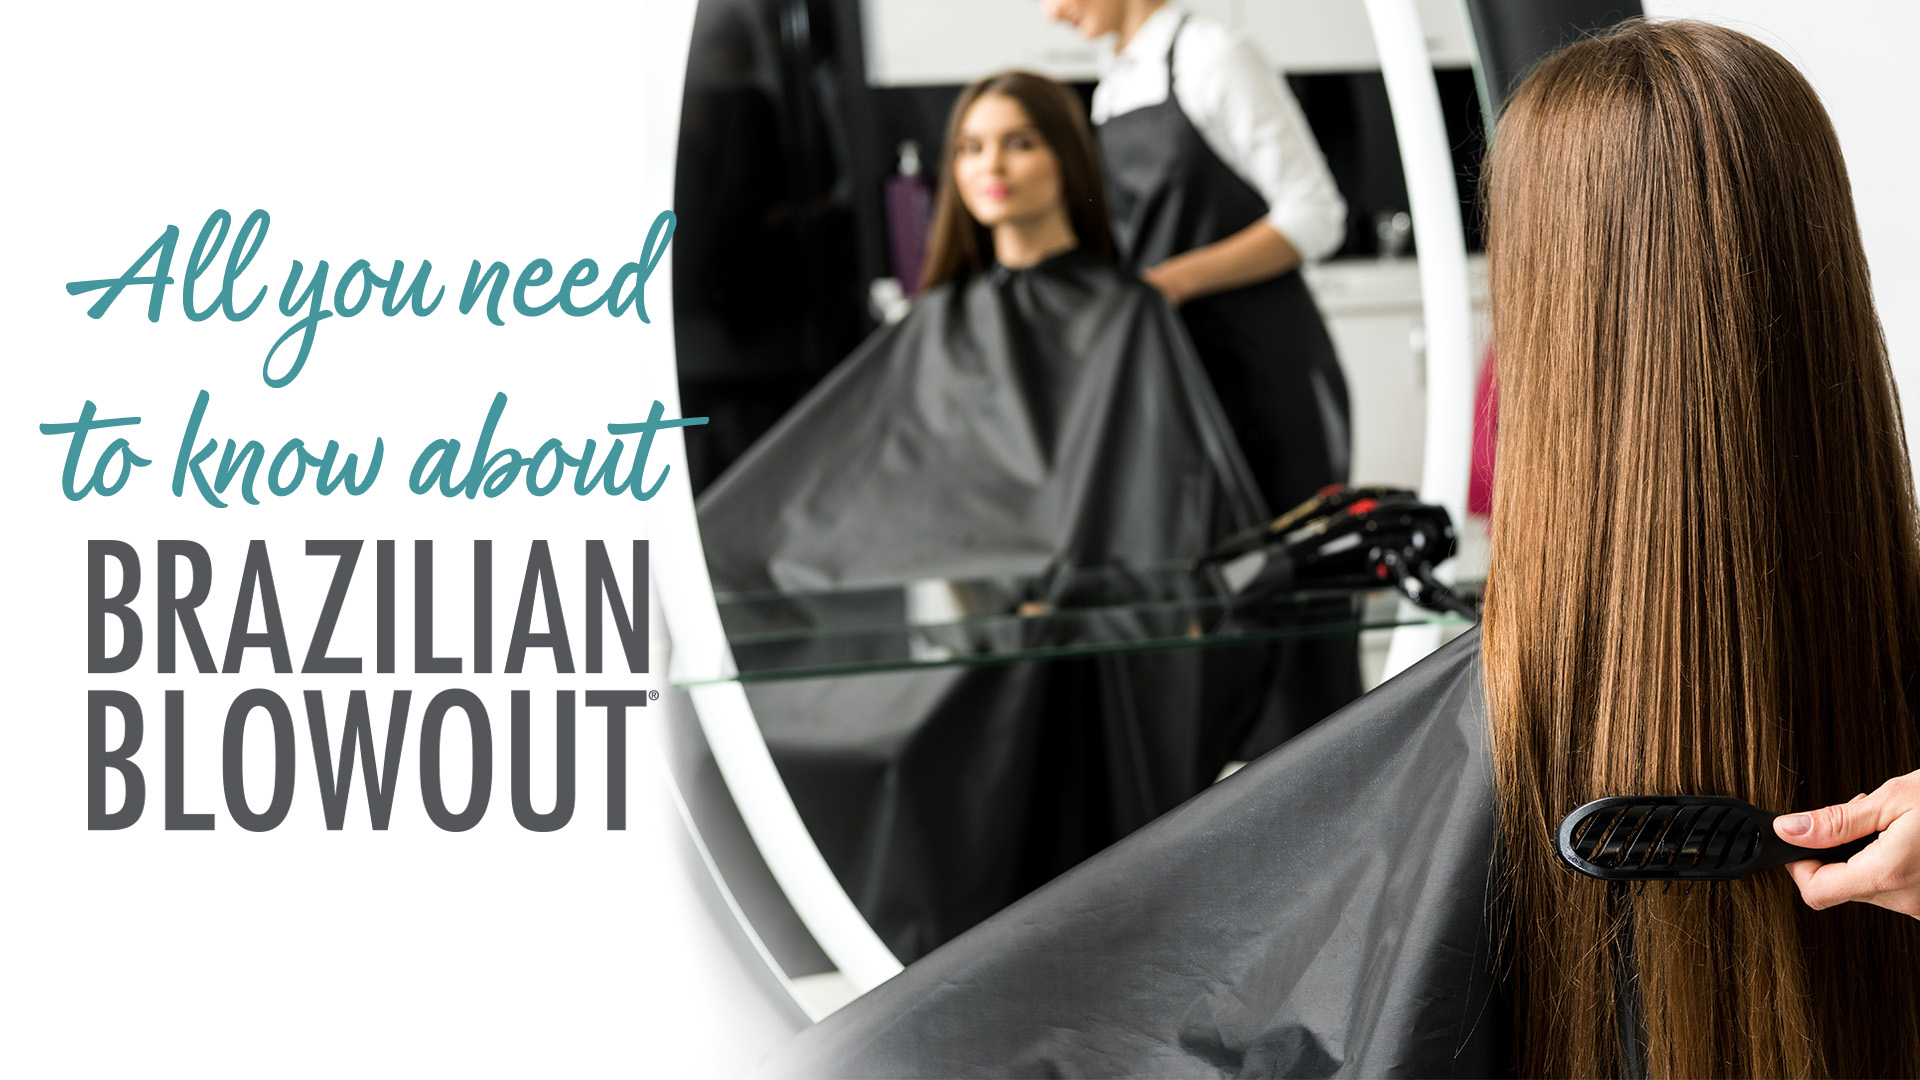 All you need to know about Brazilian Blowout